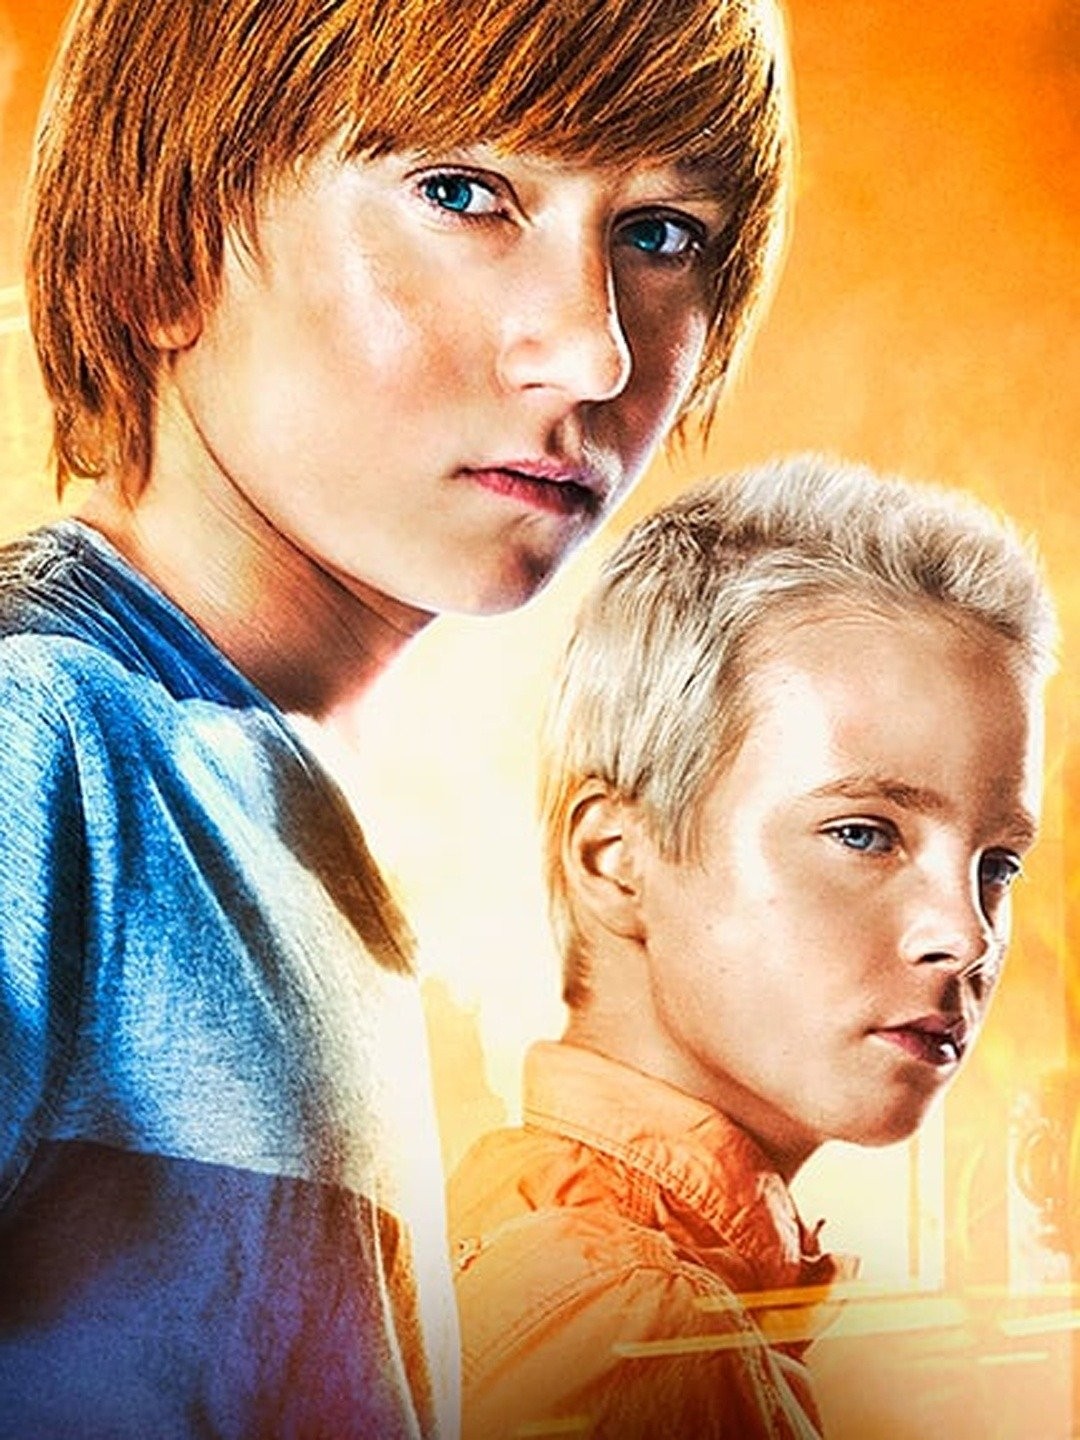 The Boy with the Golden Pants (2014) - IMDb